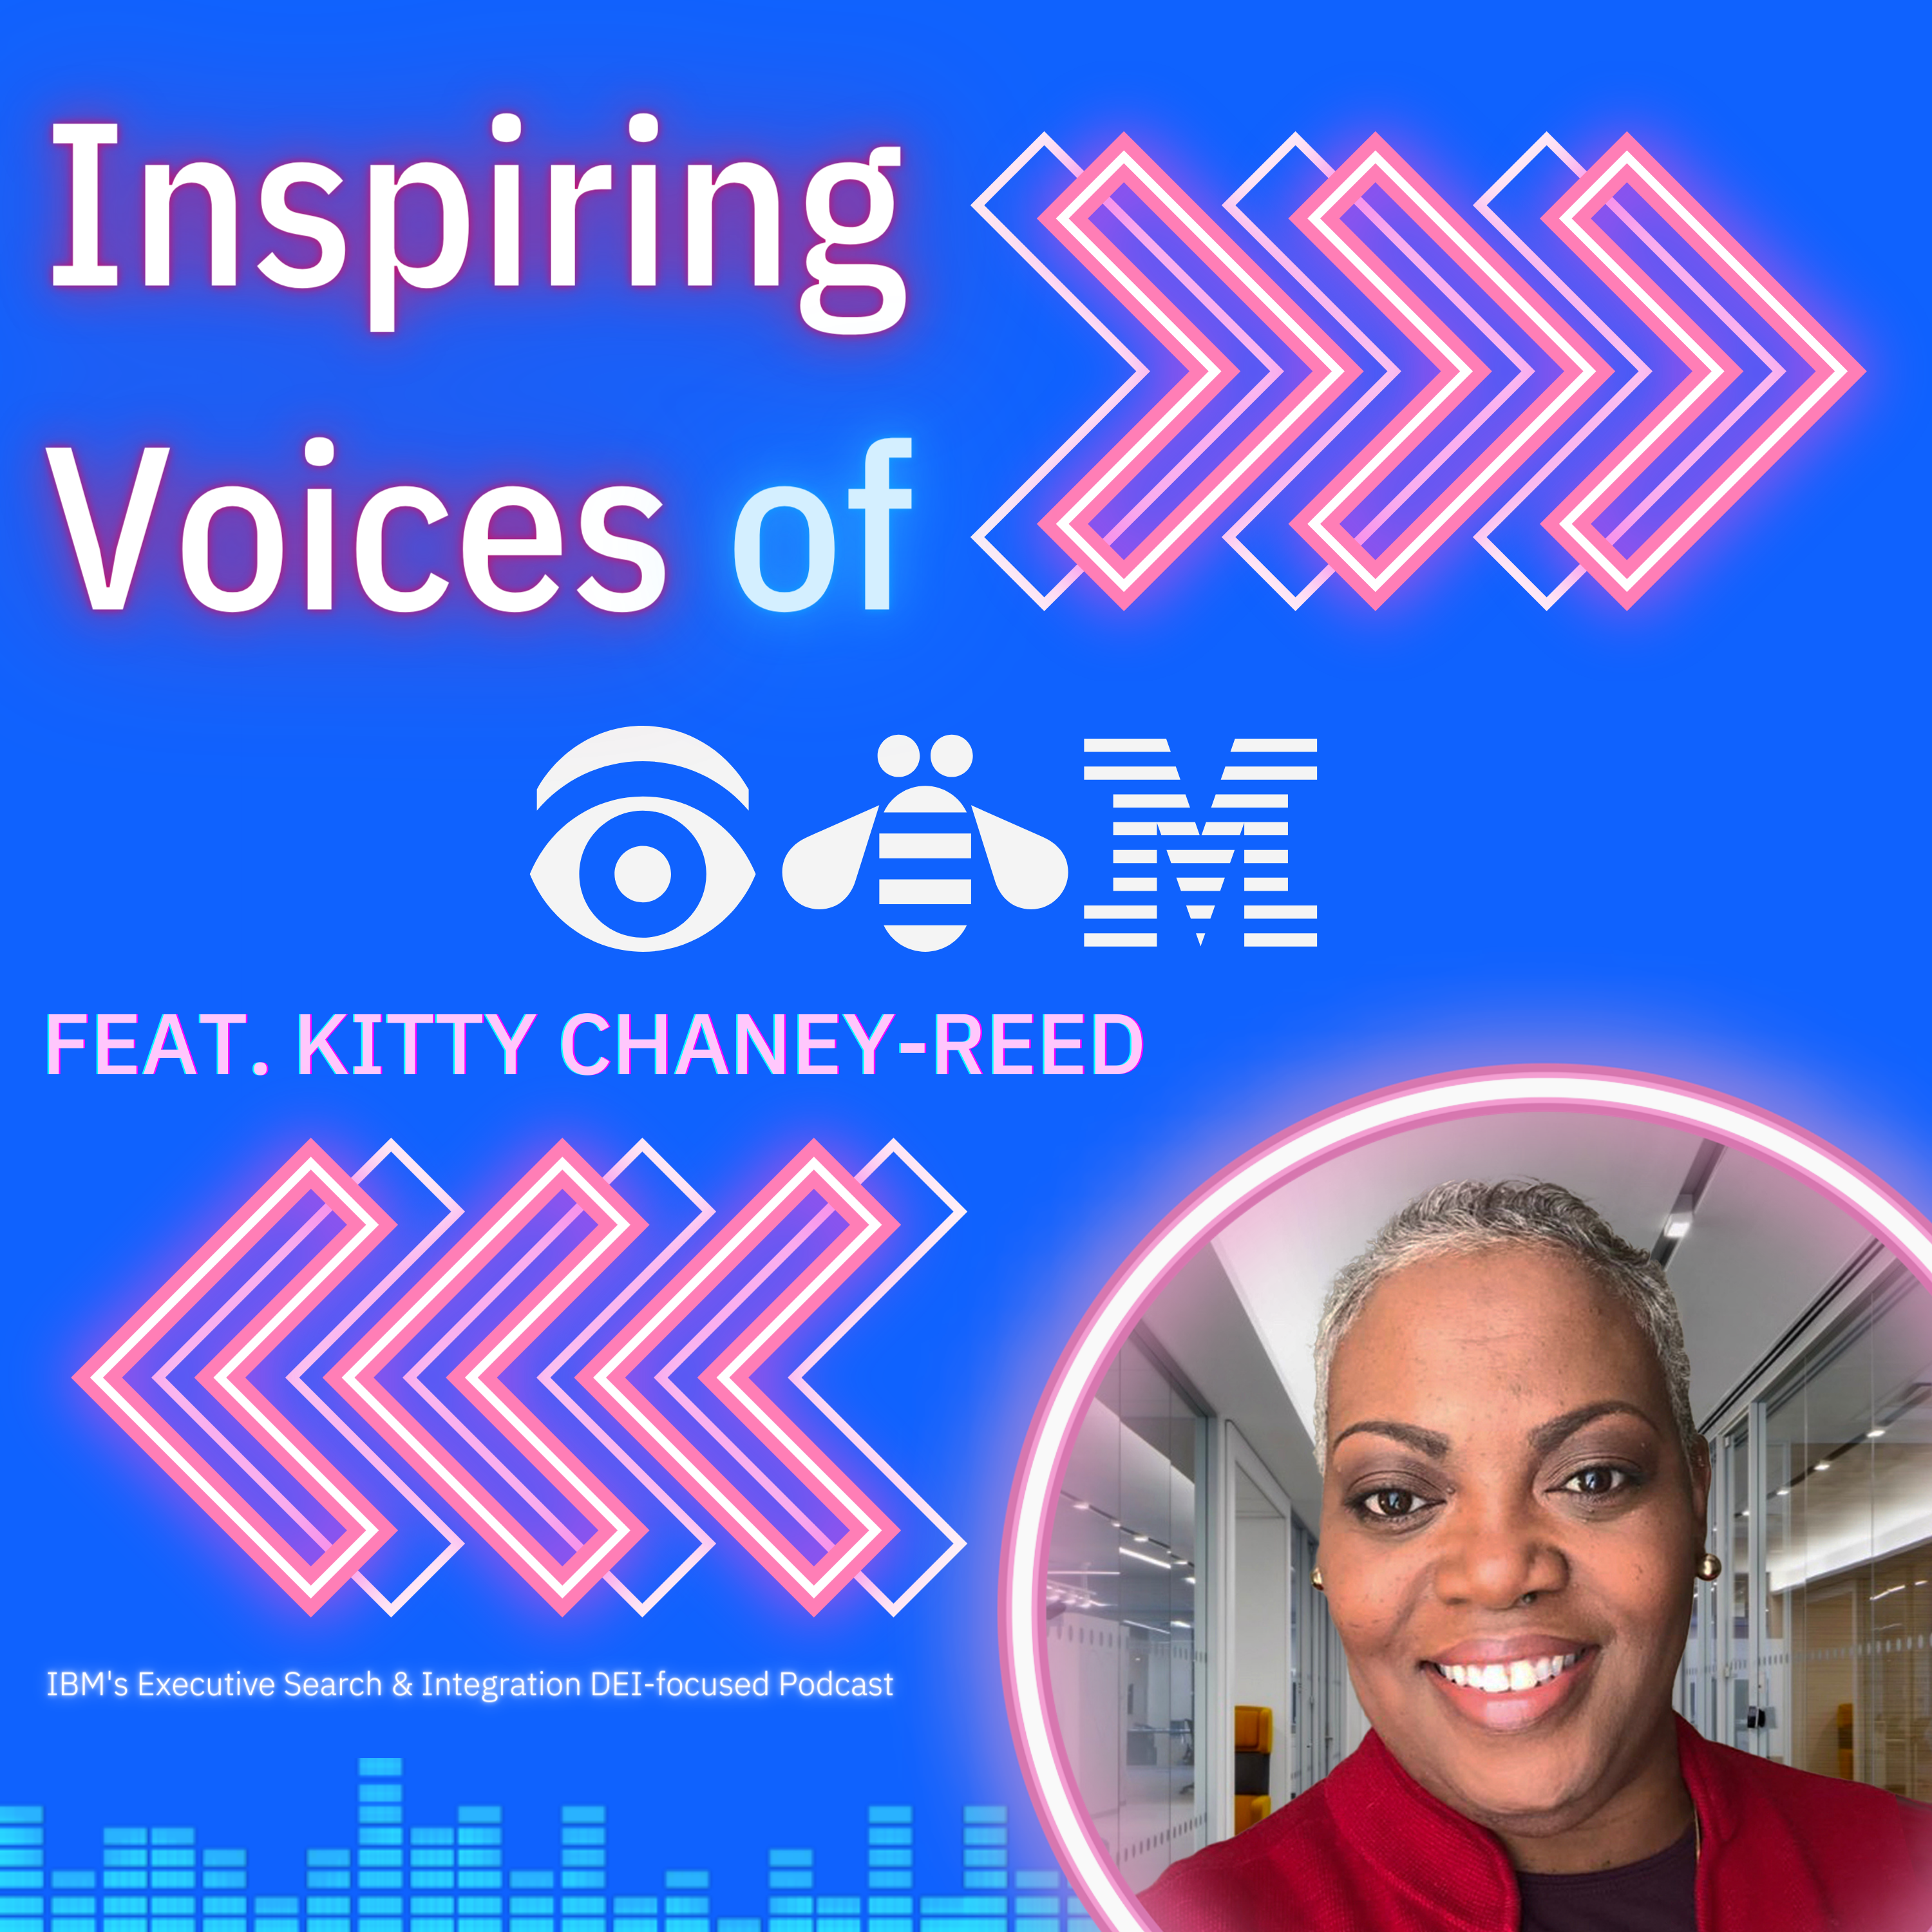 Inspiring Voices featuring Kitty Chaney-Reed